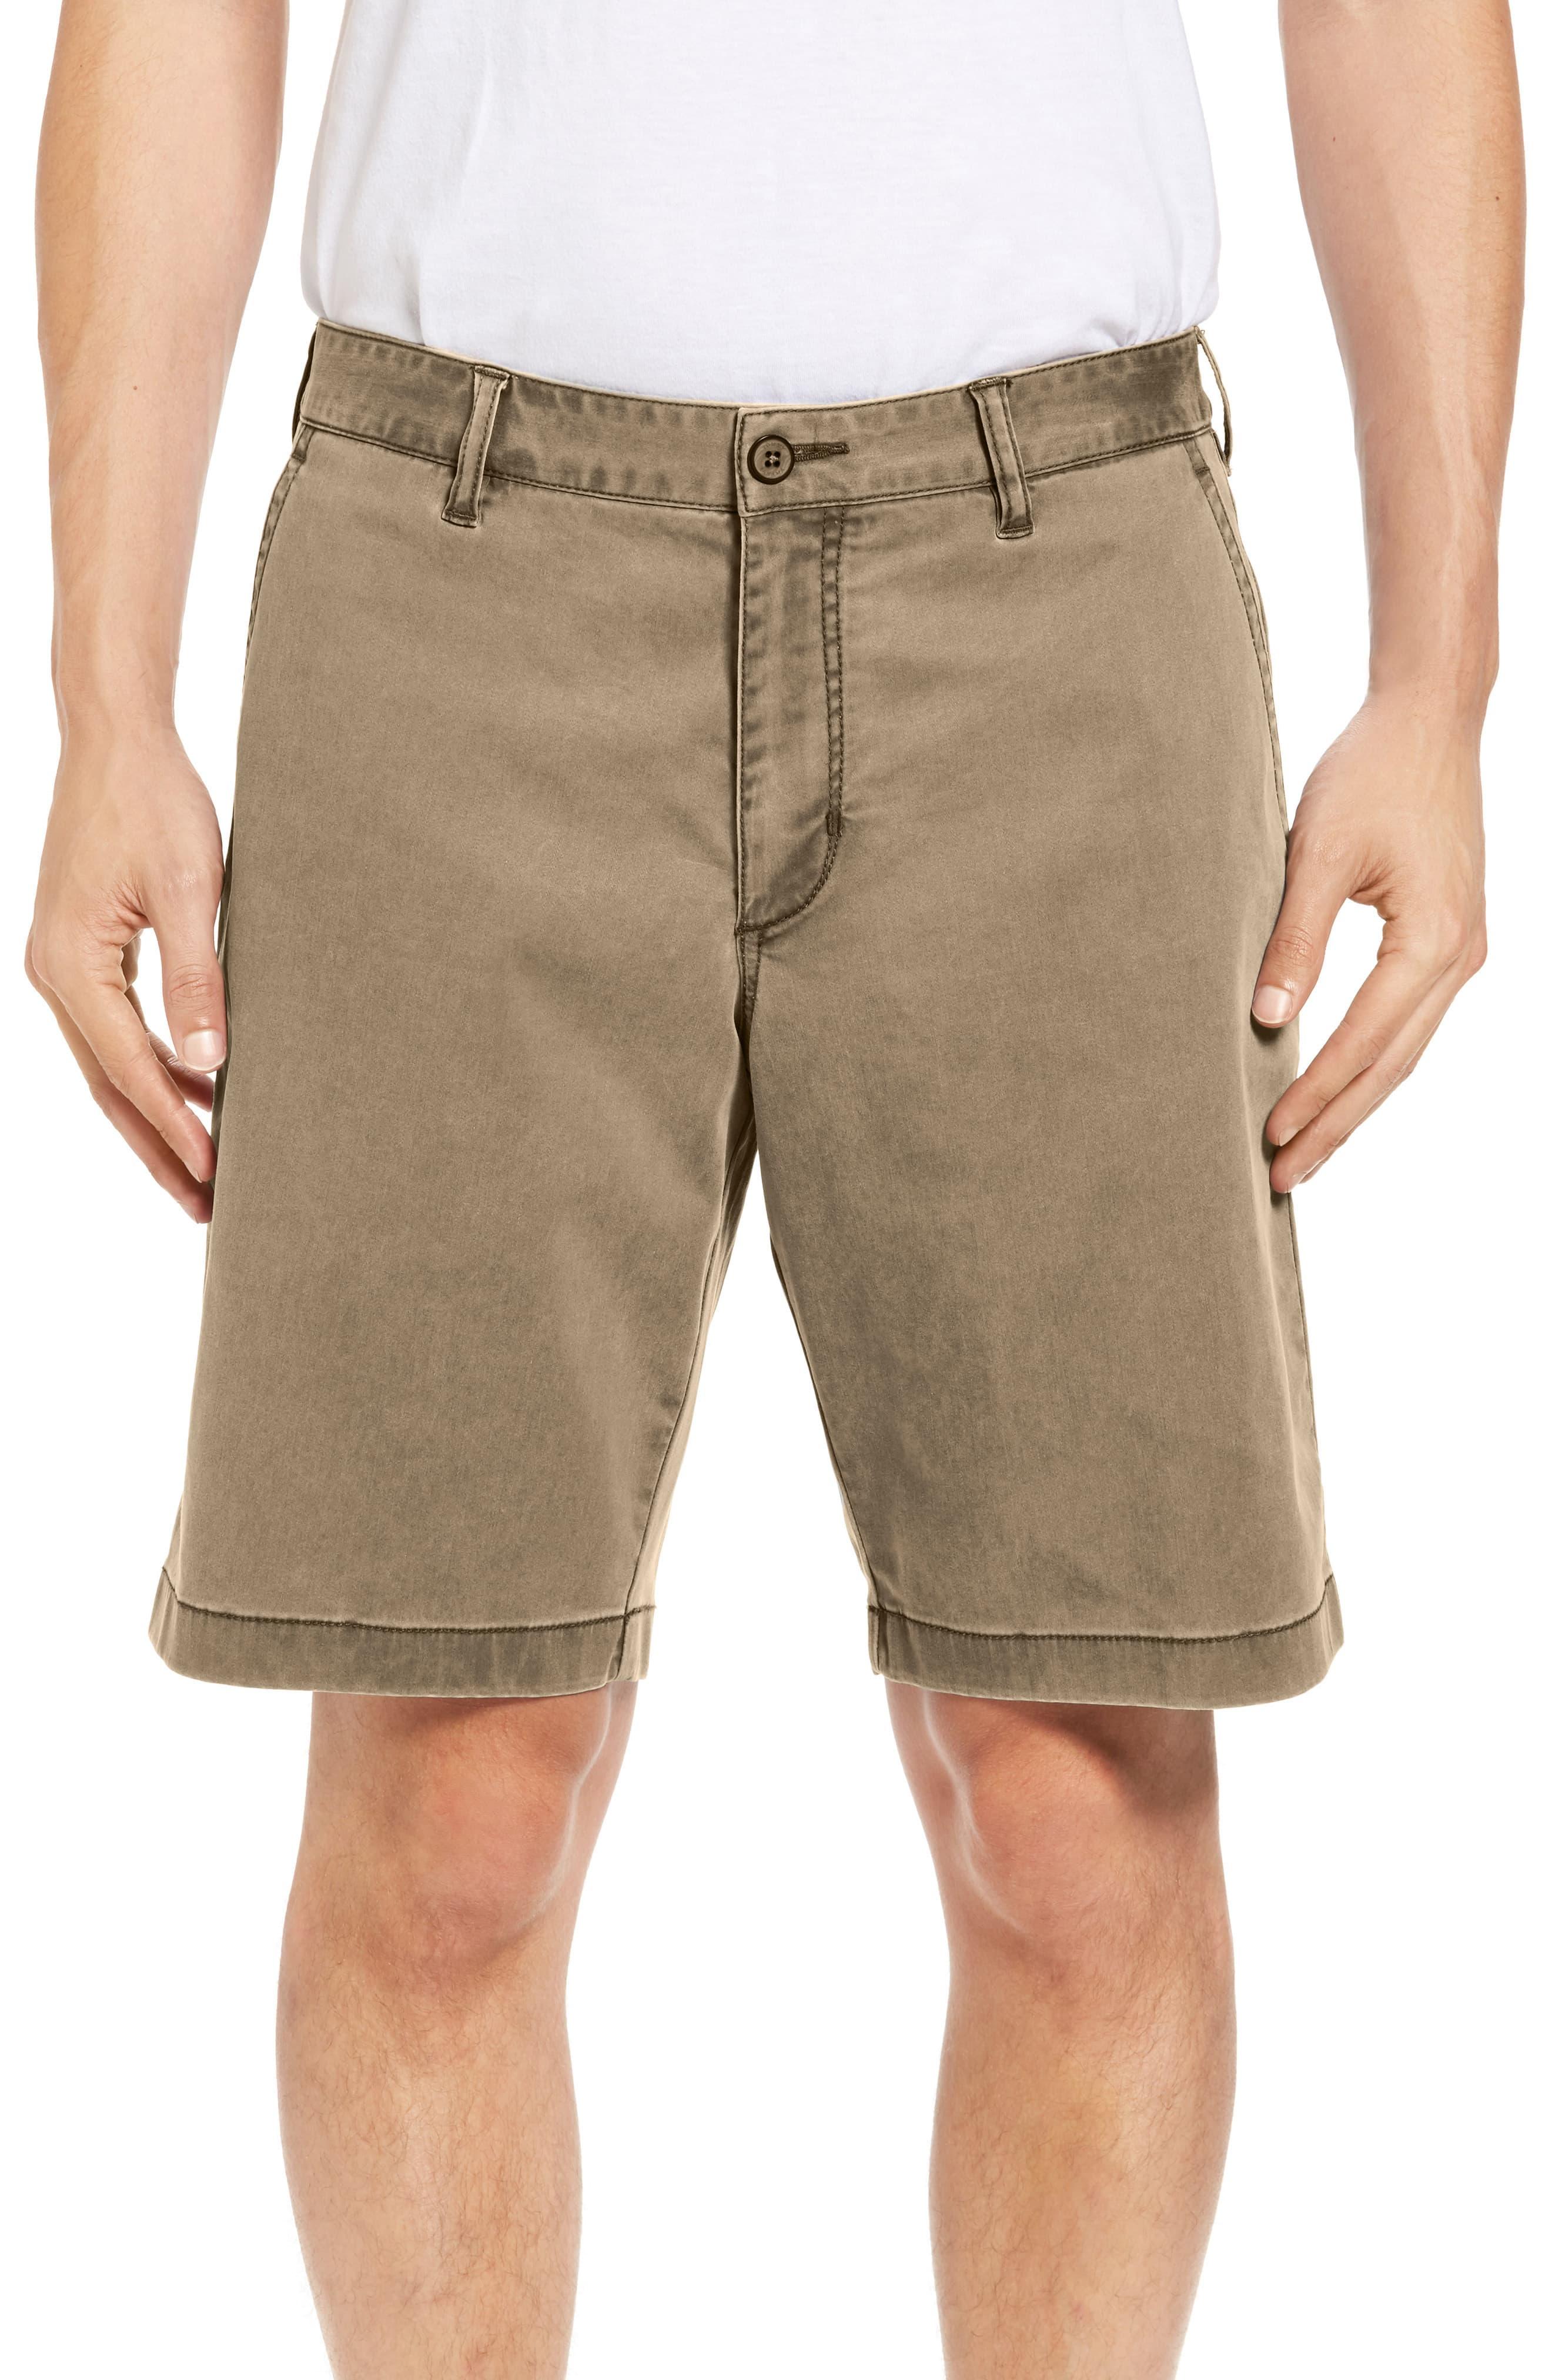 Tommy Bahama Boracay Shorts in Chambray (Black) for Men - Save 63% - Lyst